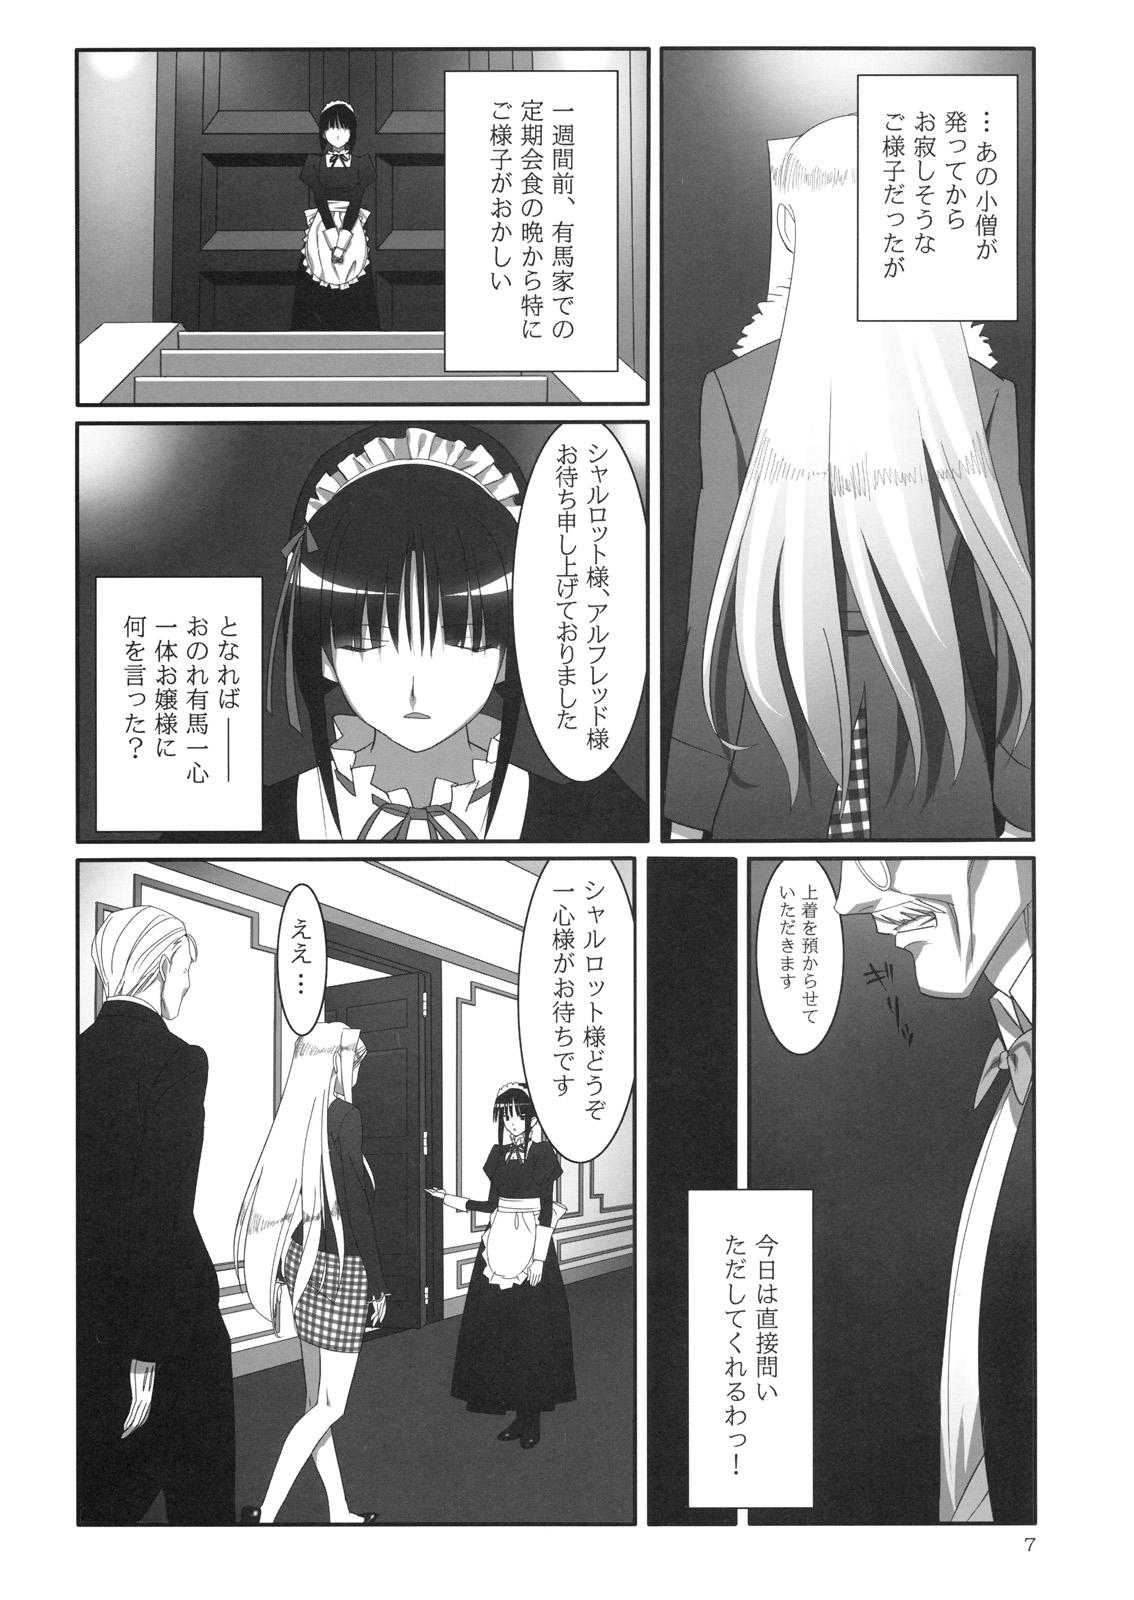 Soloboy Admired beautiful flower. 2 - Princess lover Young Petite Porn - Page 6